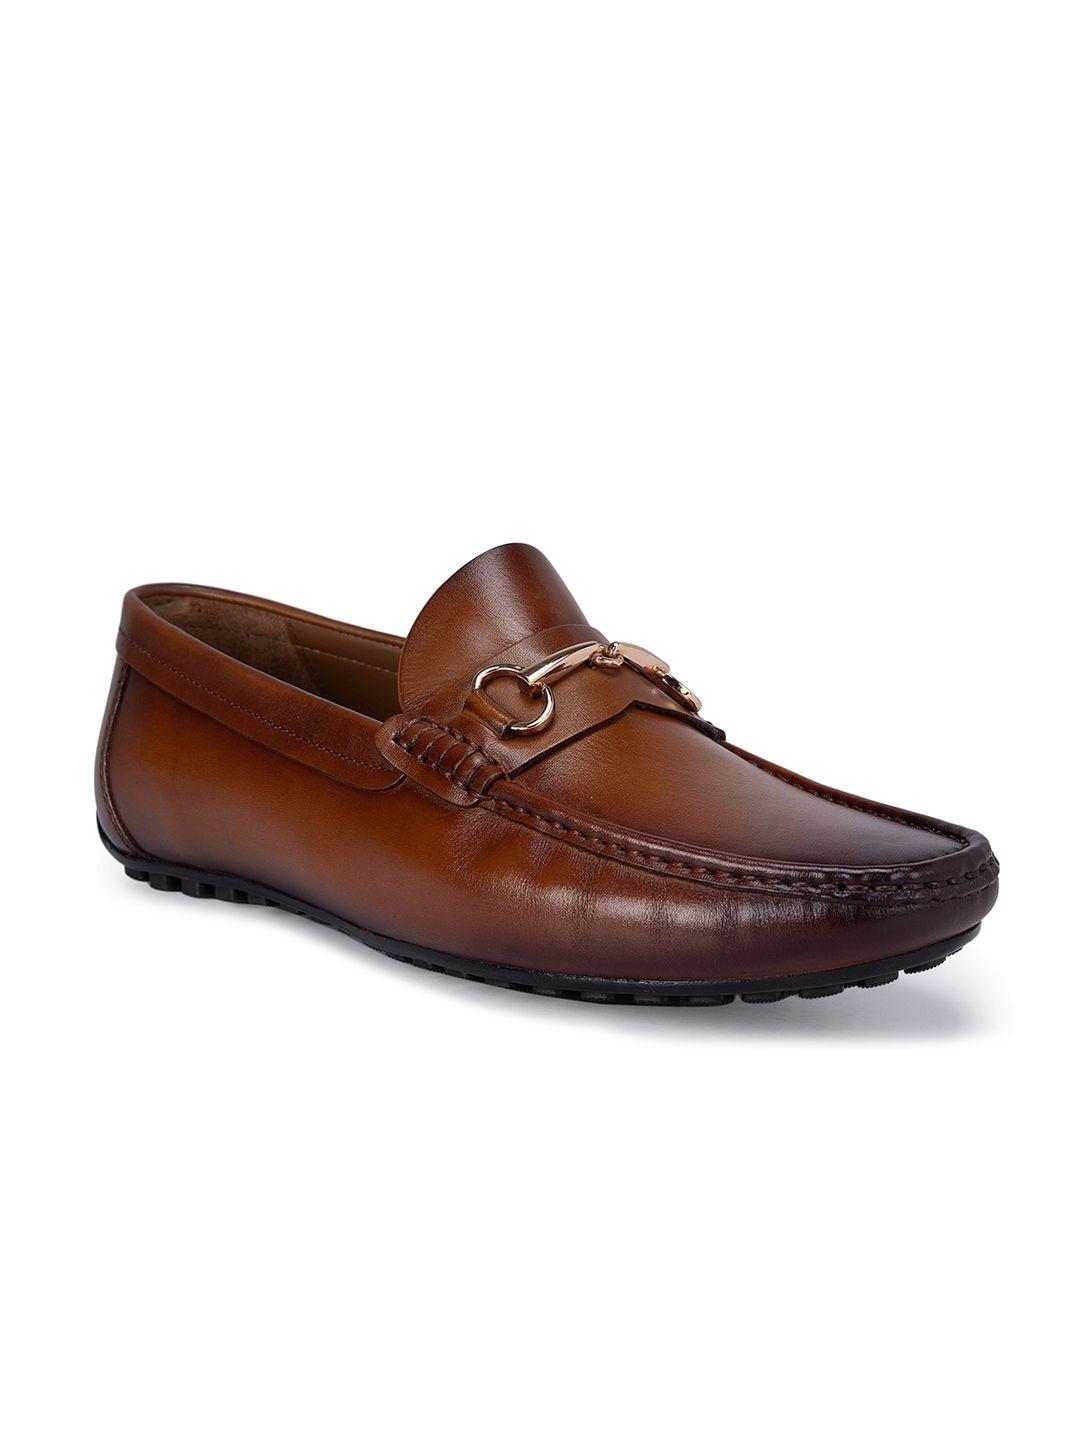 ROSSO BRUNELLO Men Leather Formal Loafers